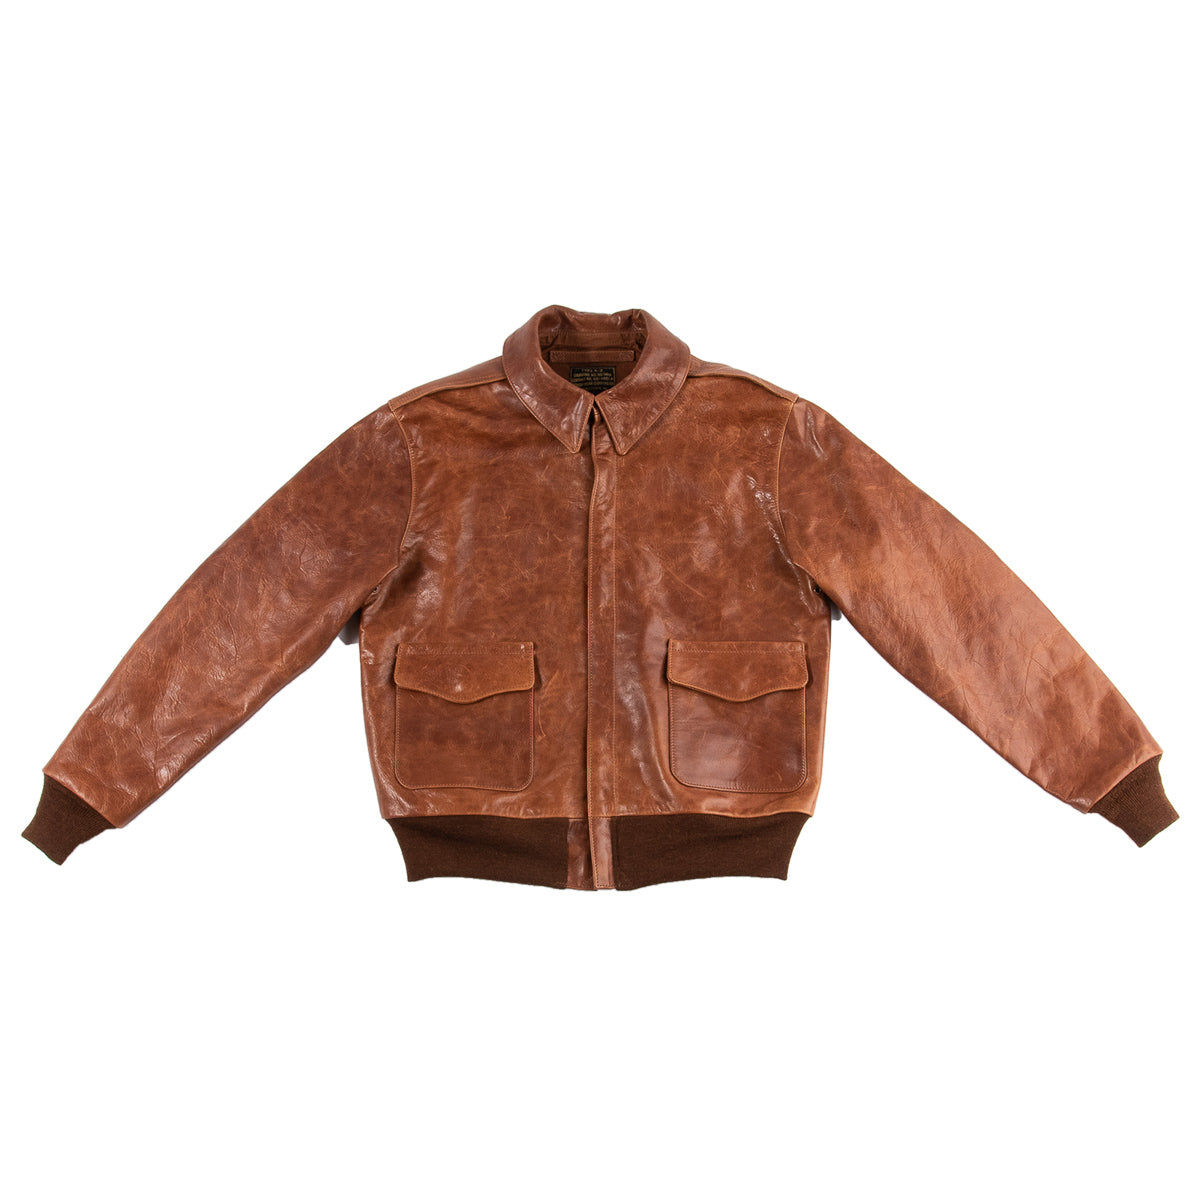 Type A-2 Leather Jacket - Rough Wear 1401P